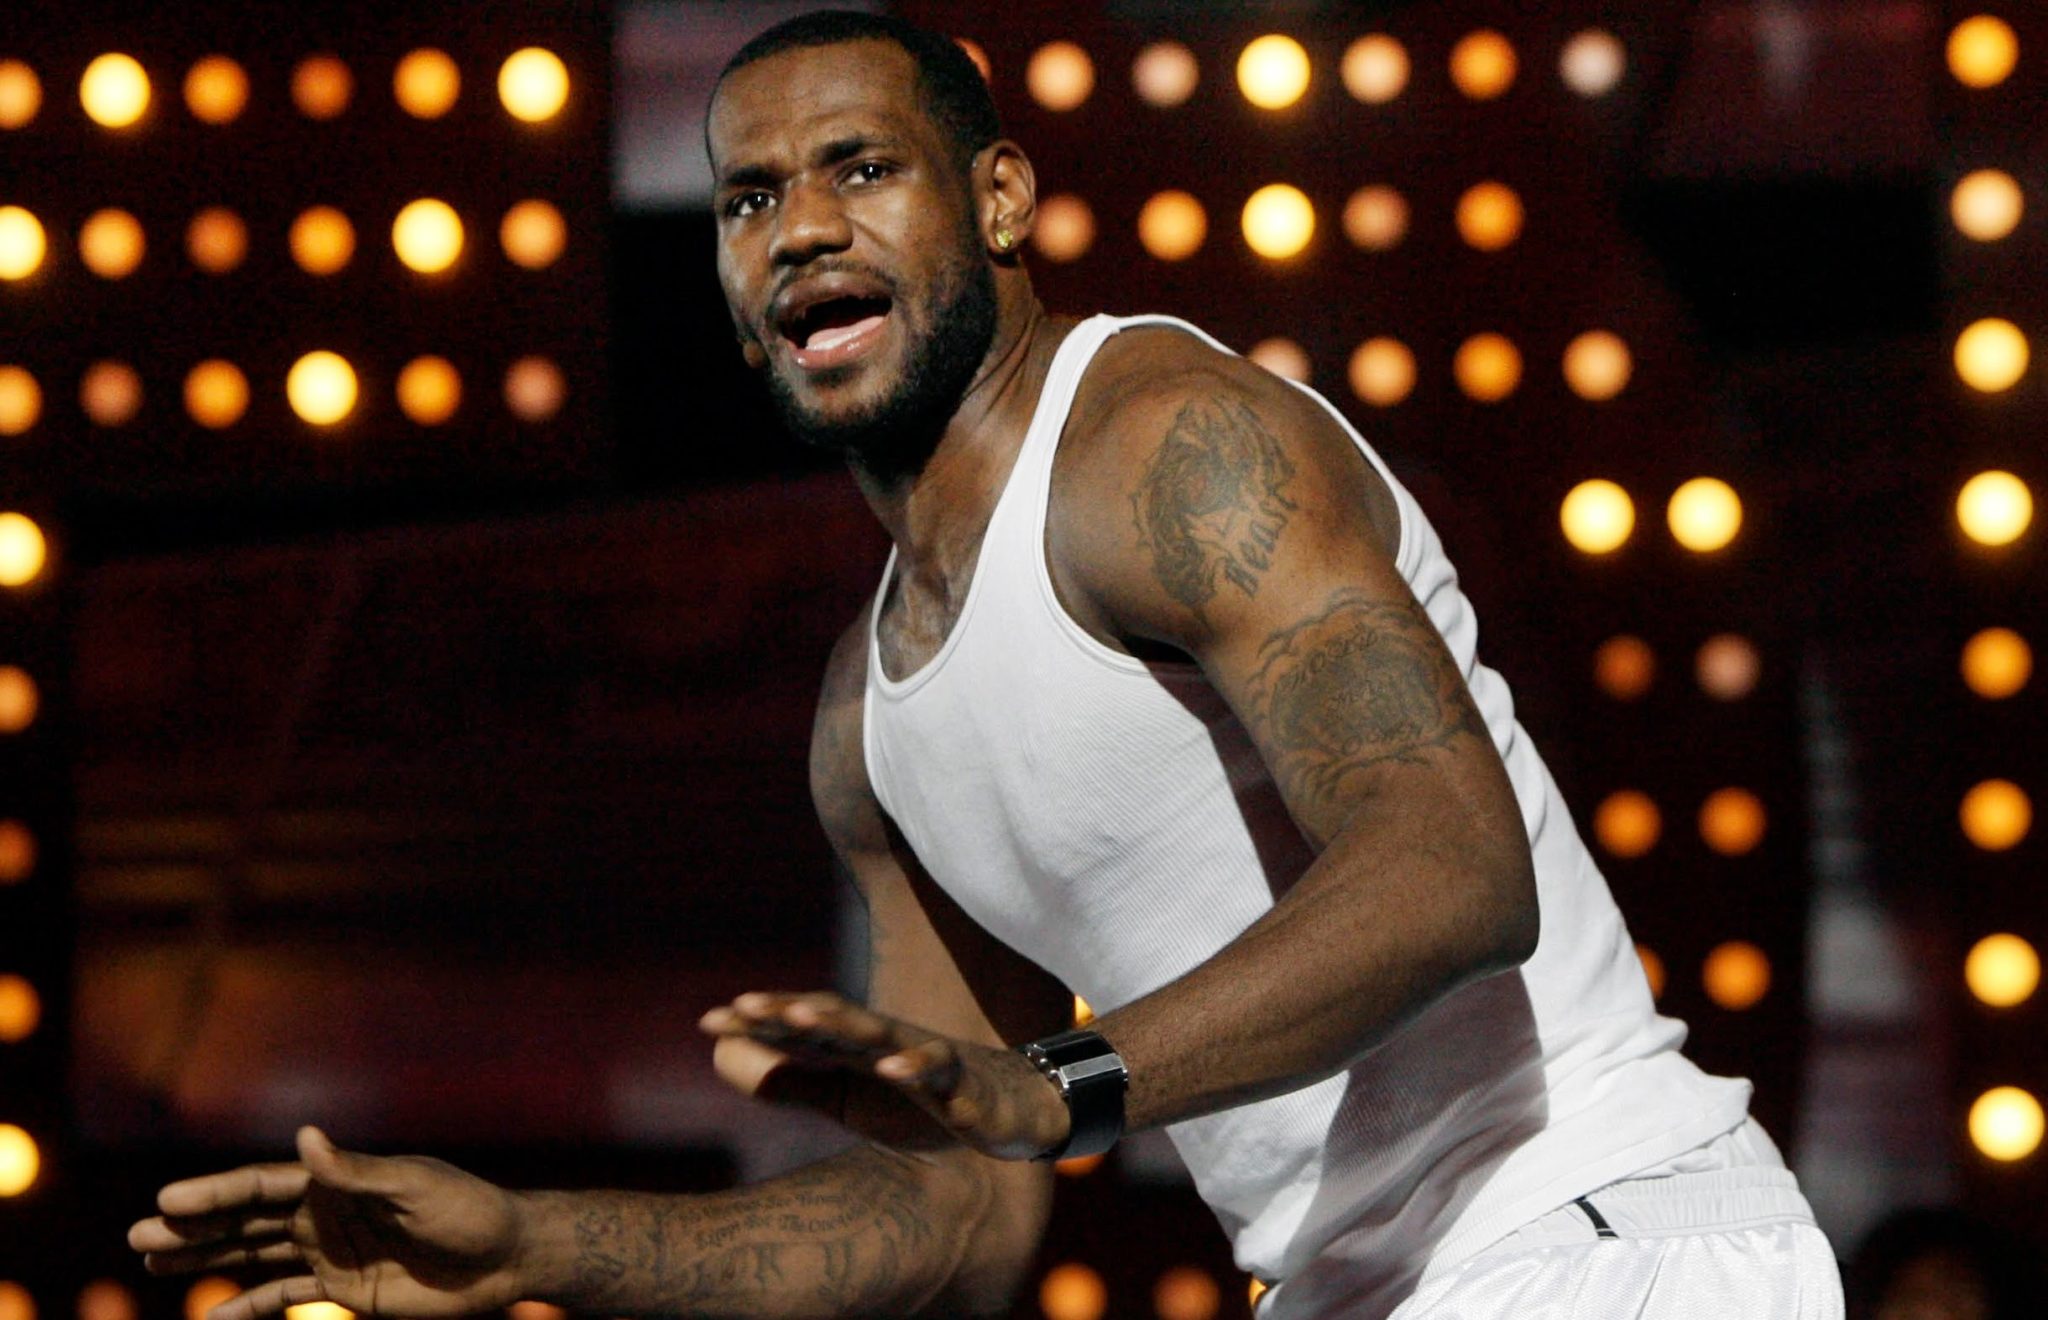 VIDEO LeBron James Gets On Stage At ESPYs AfterParty